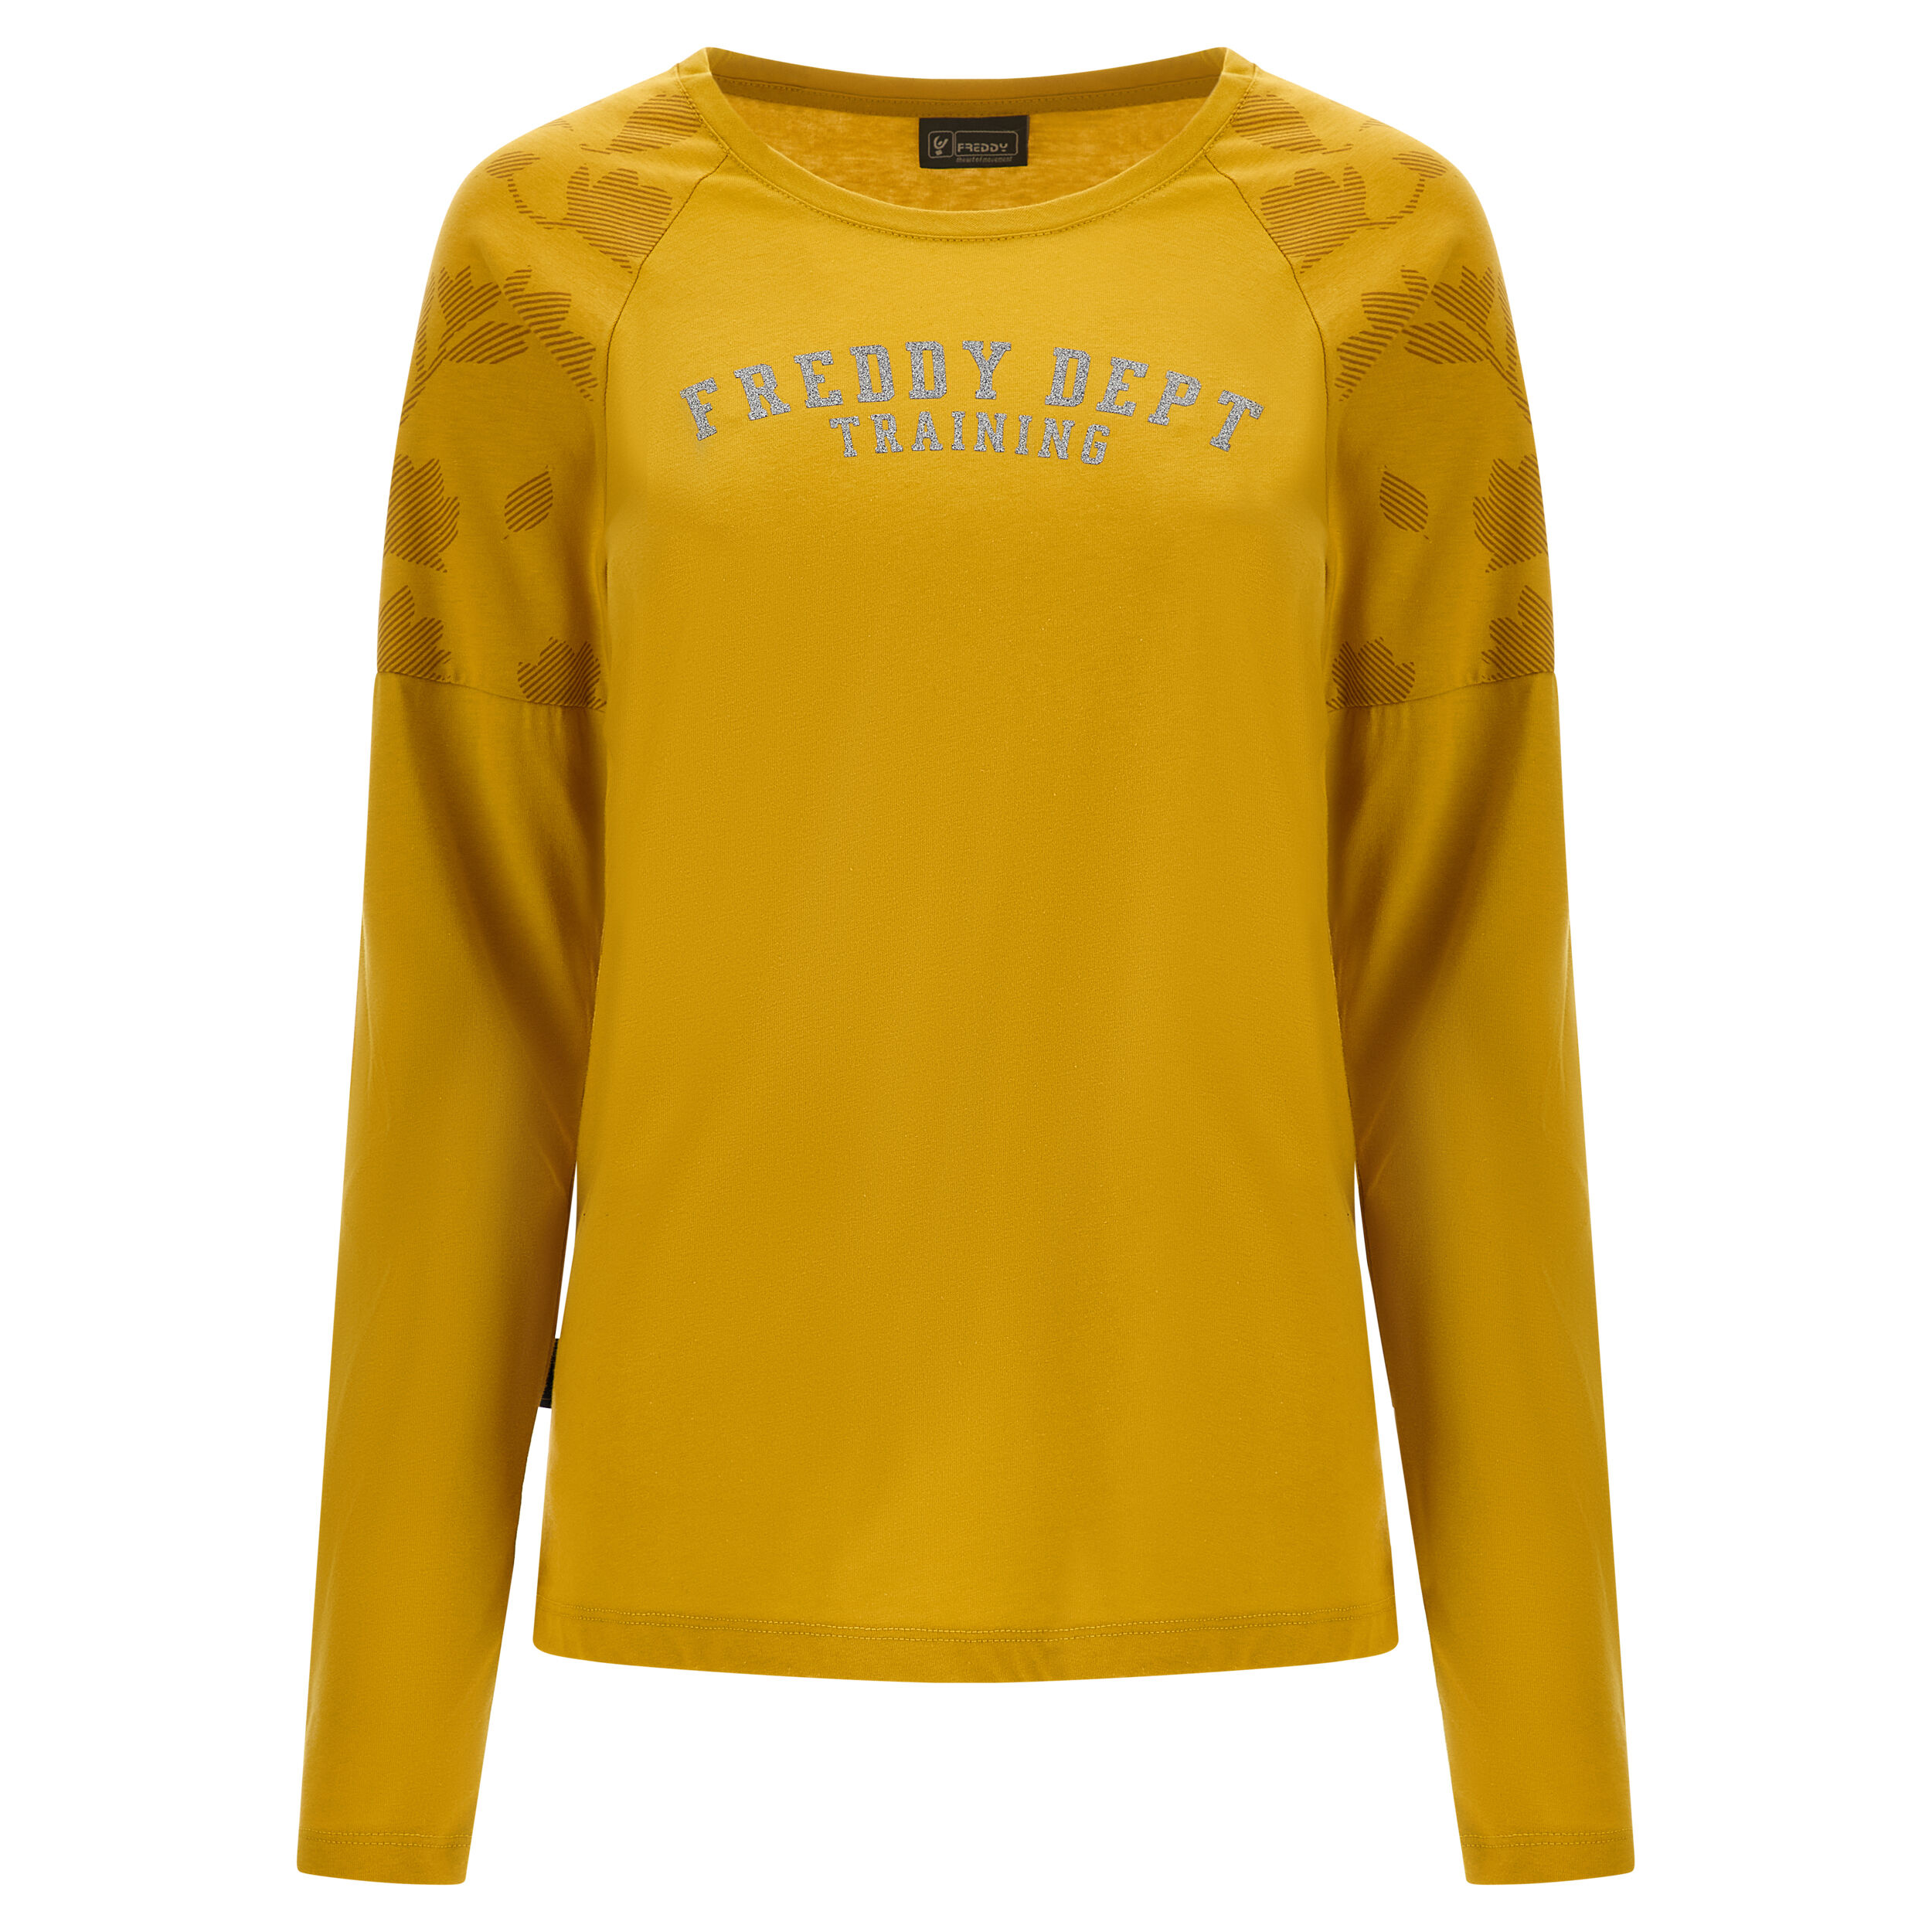 Freddy T-shirt manica lunga con inserti su spalle stampa floreale Yellow-Allover Flower Yellow Donna Large